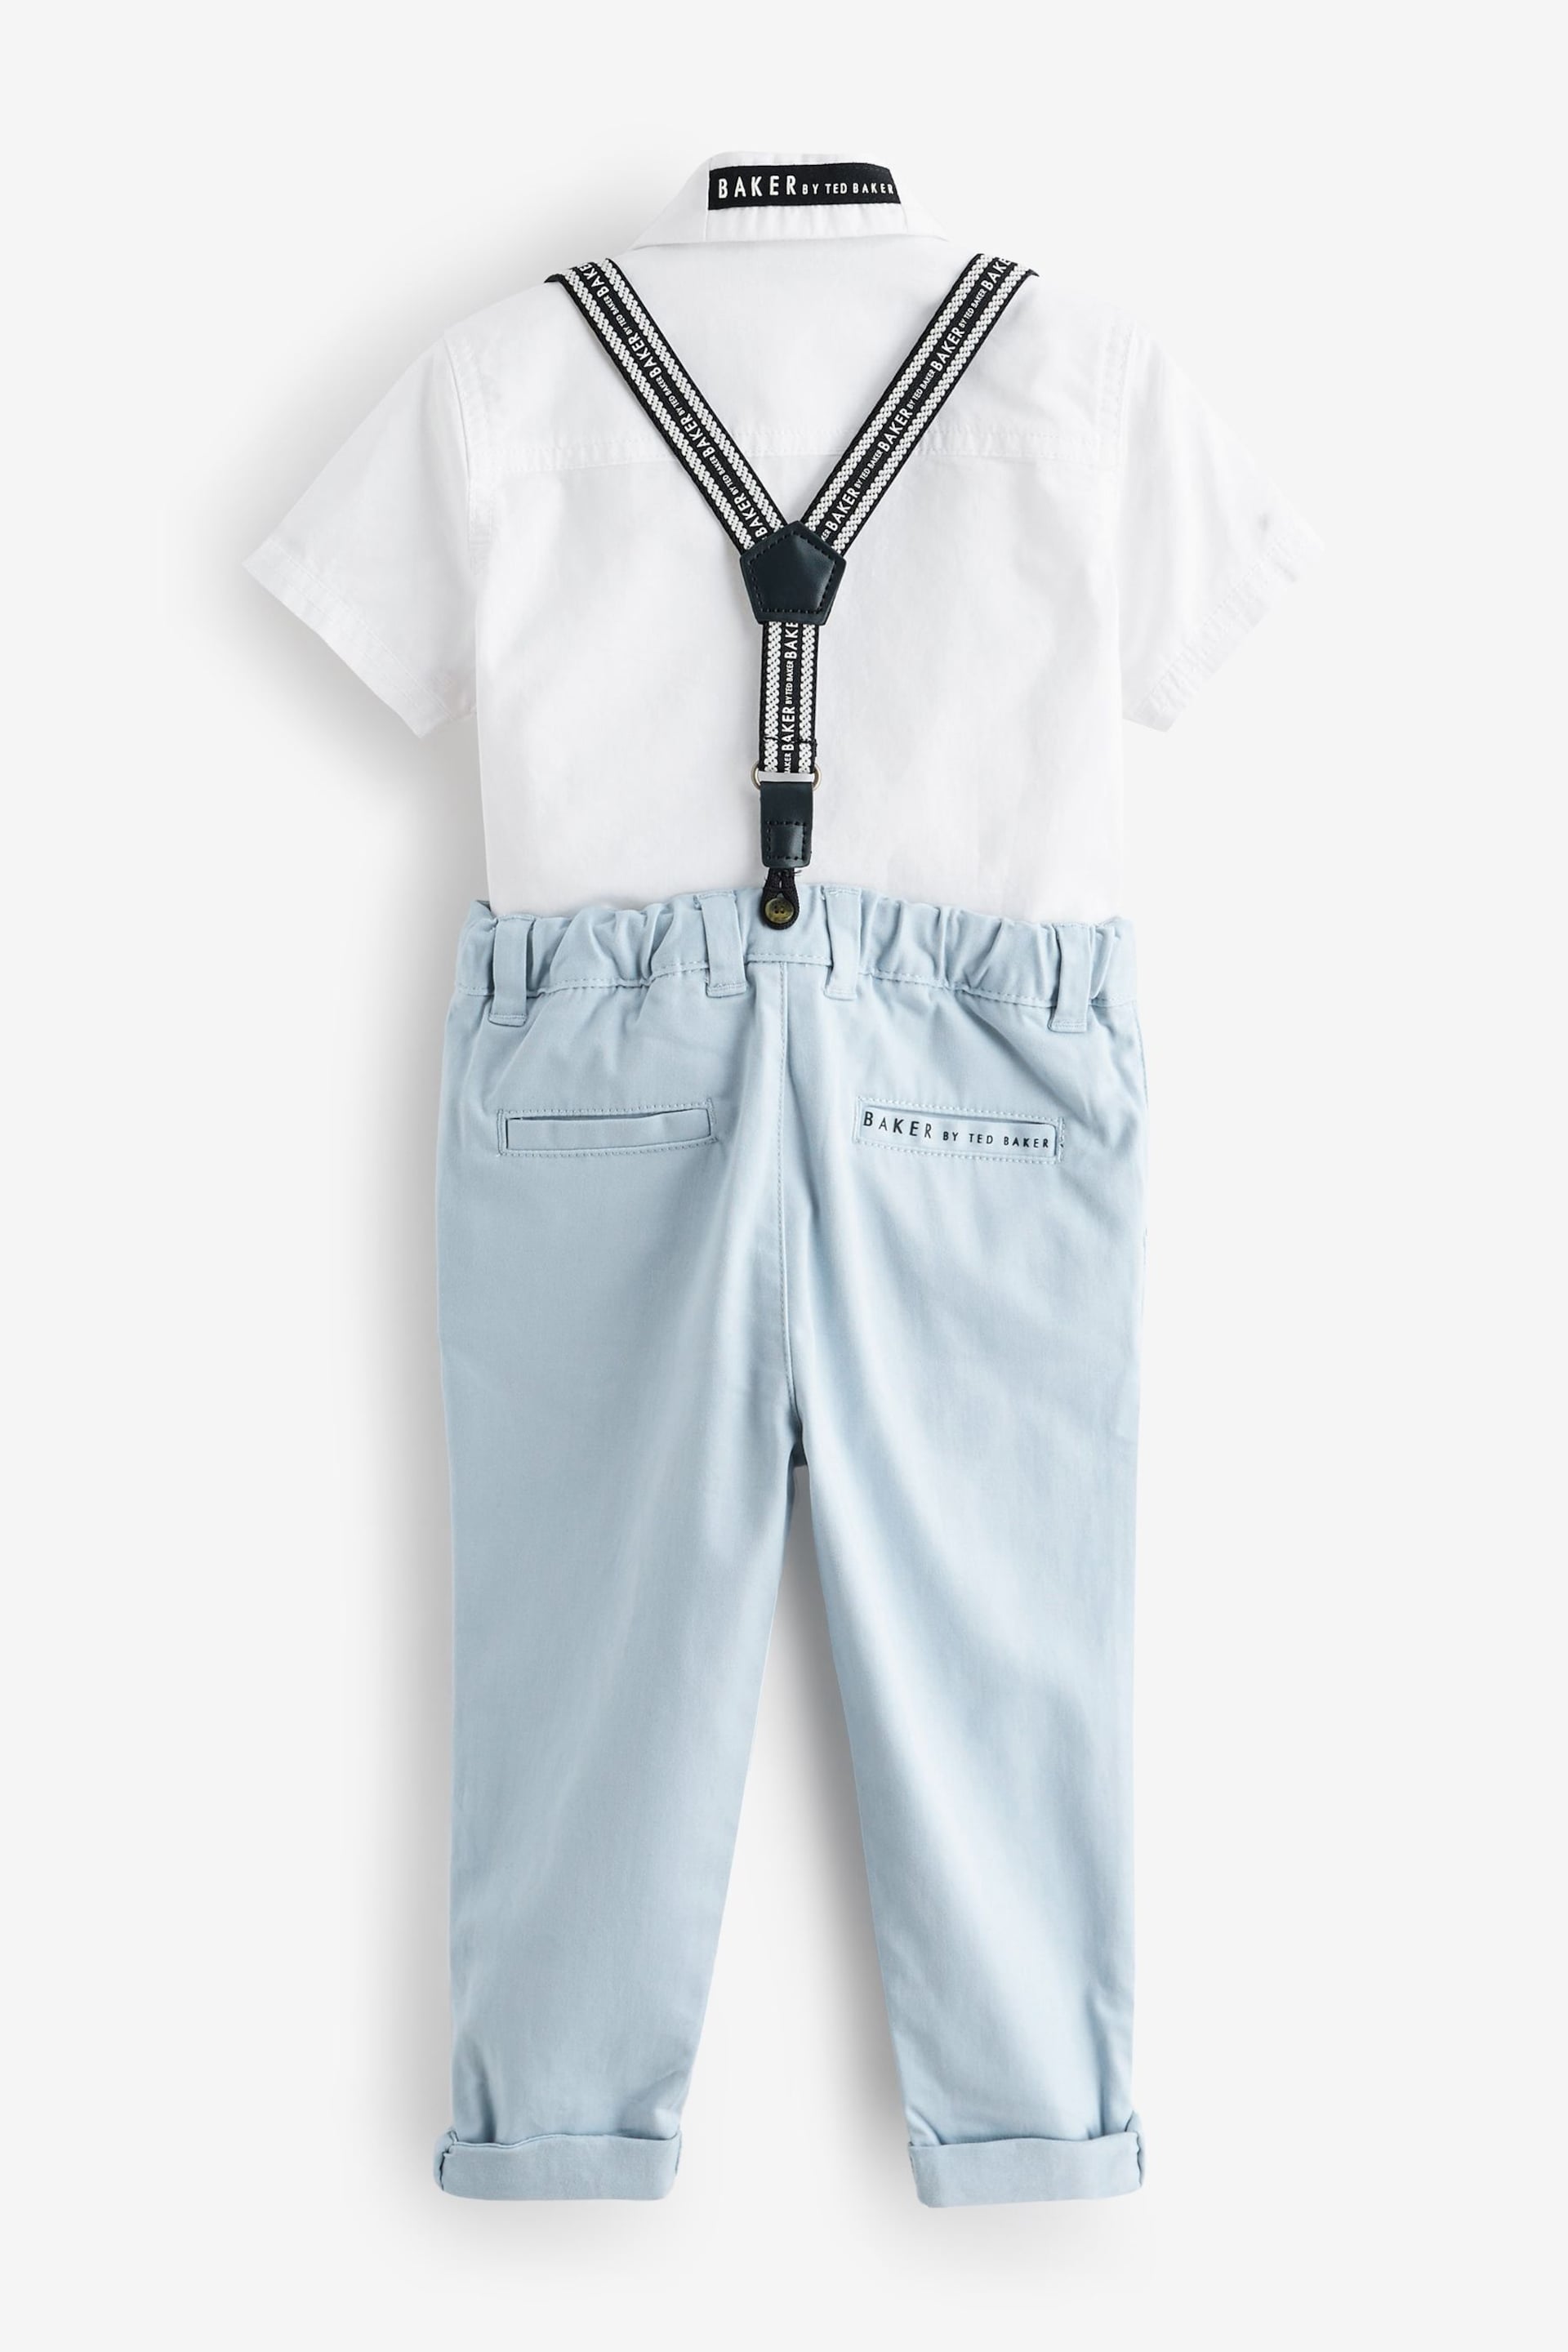 Baker by Ted Baker Shirt and Trousers Set - Image 9 of 12